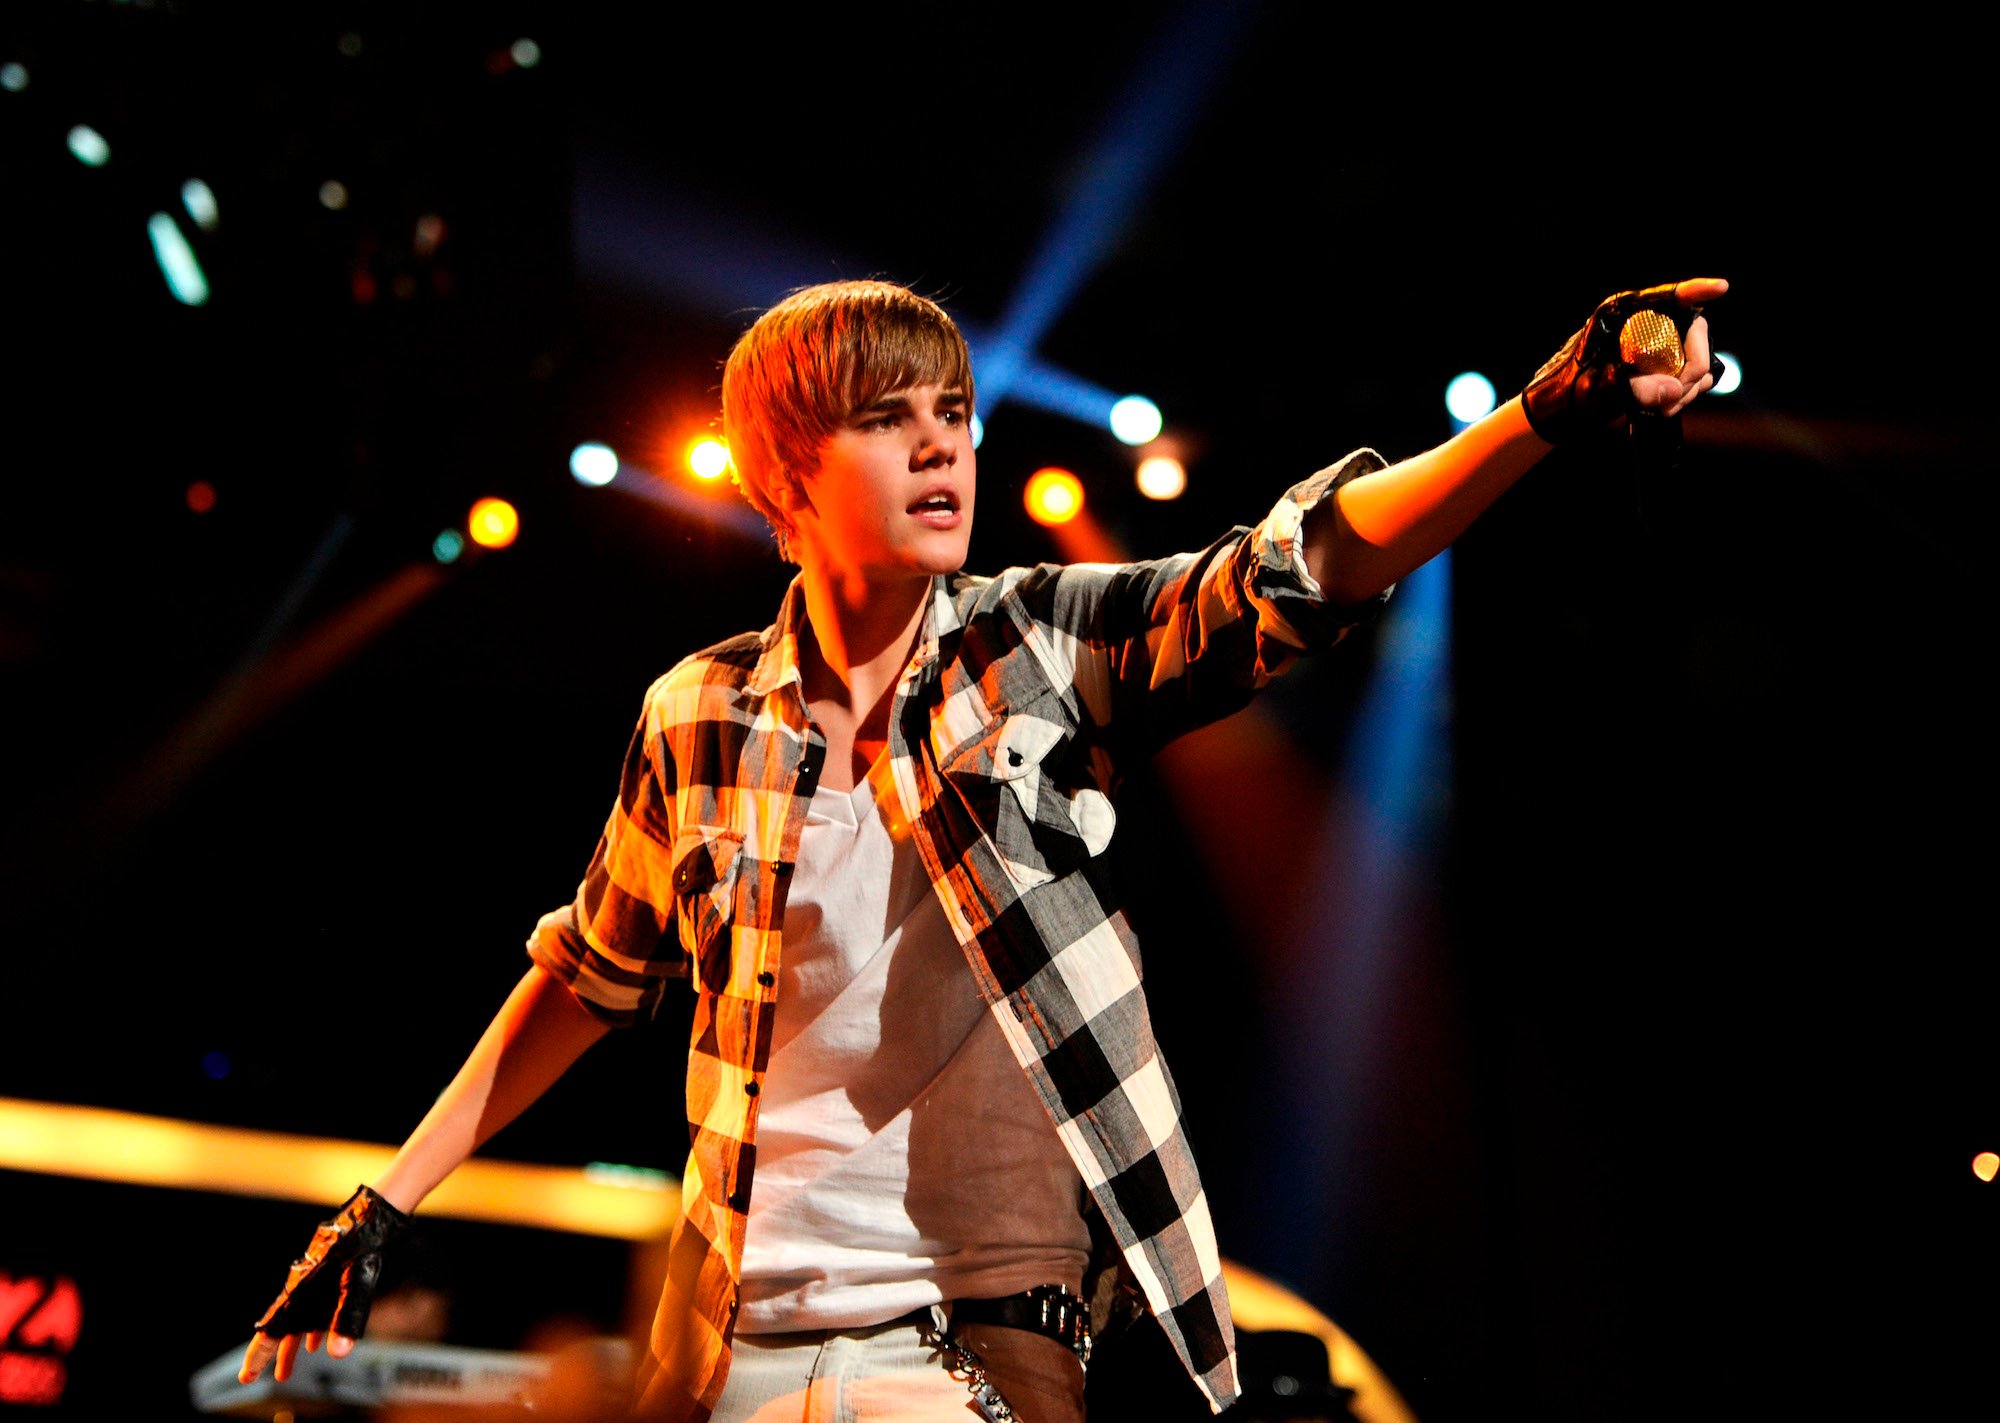 Justin Bieber onstage at the 2010 Jingle Ball